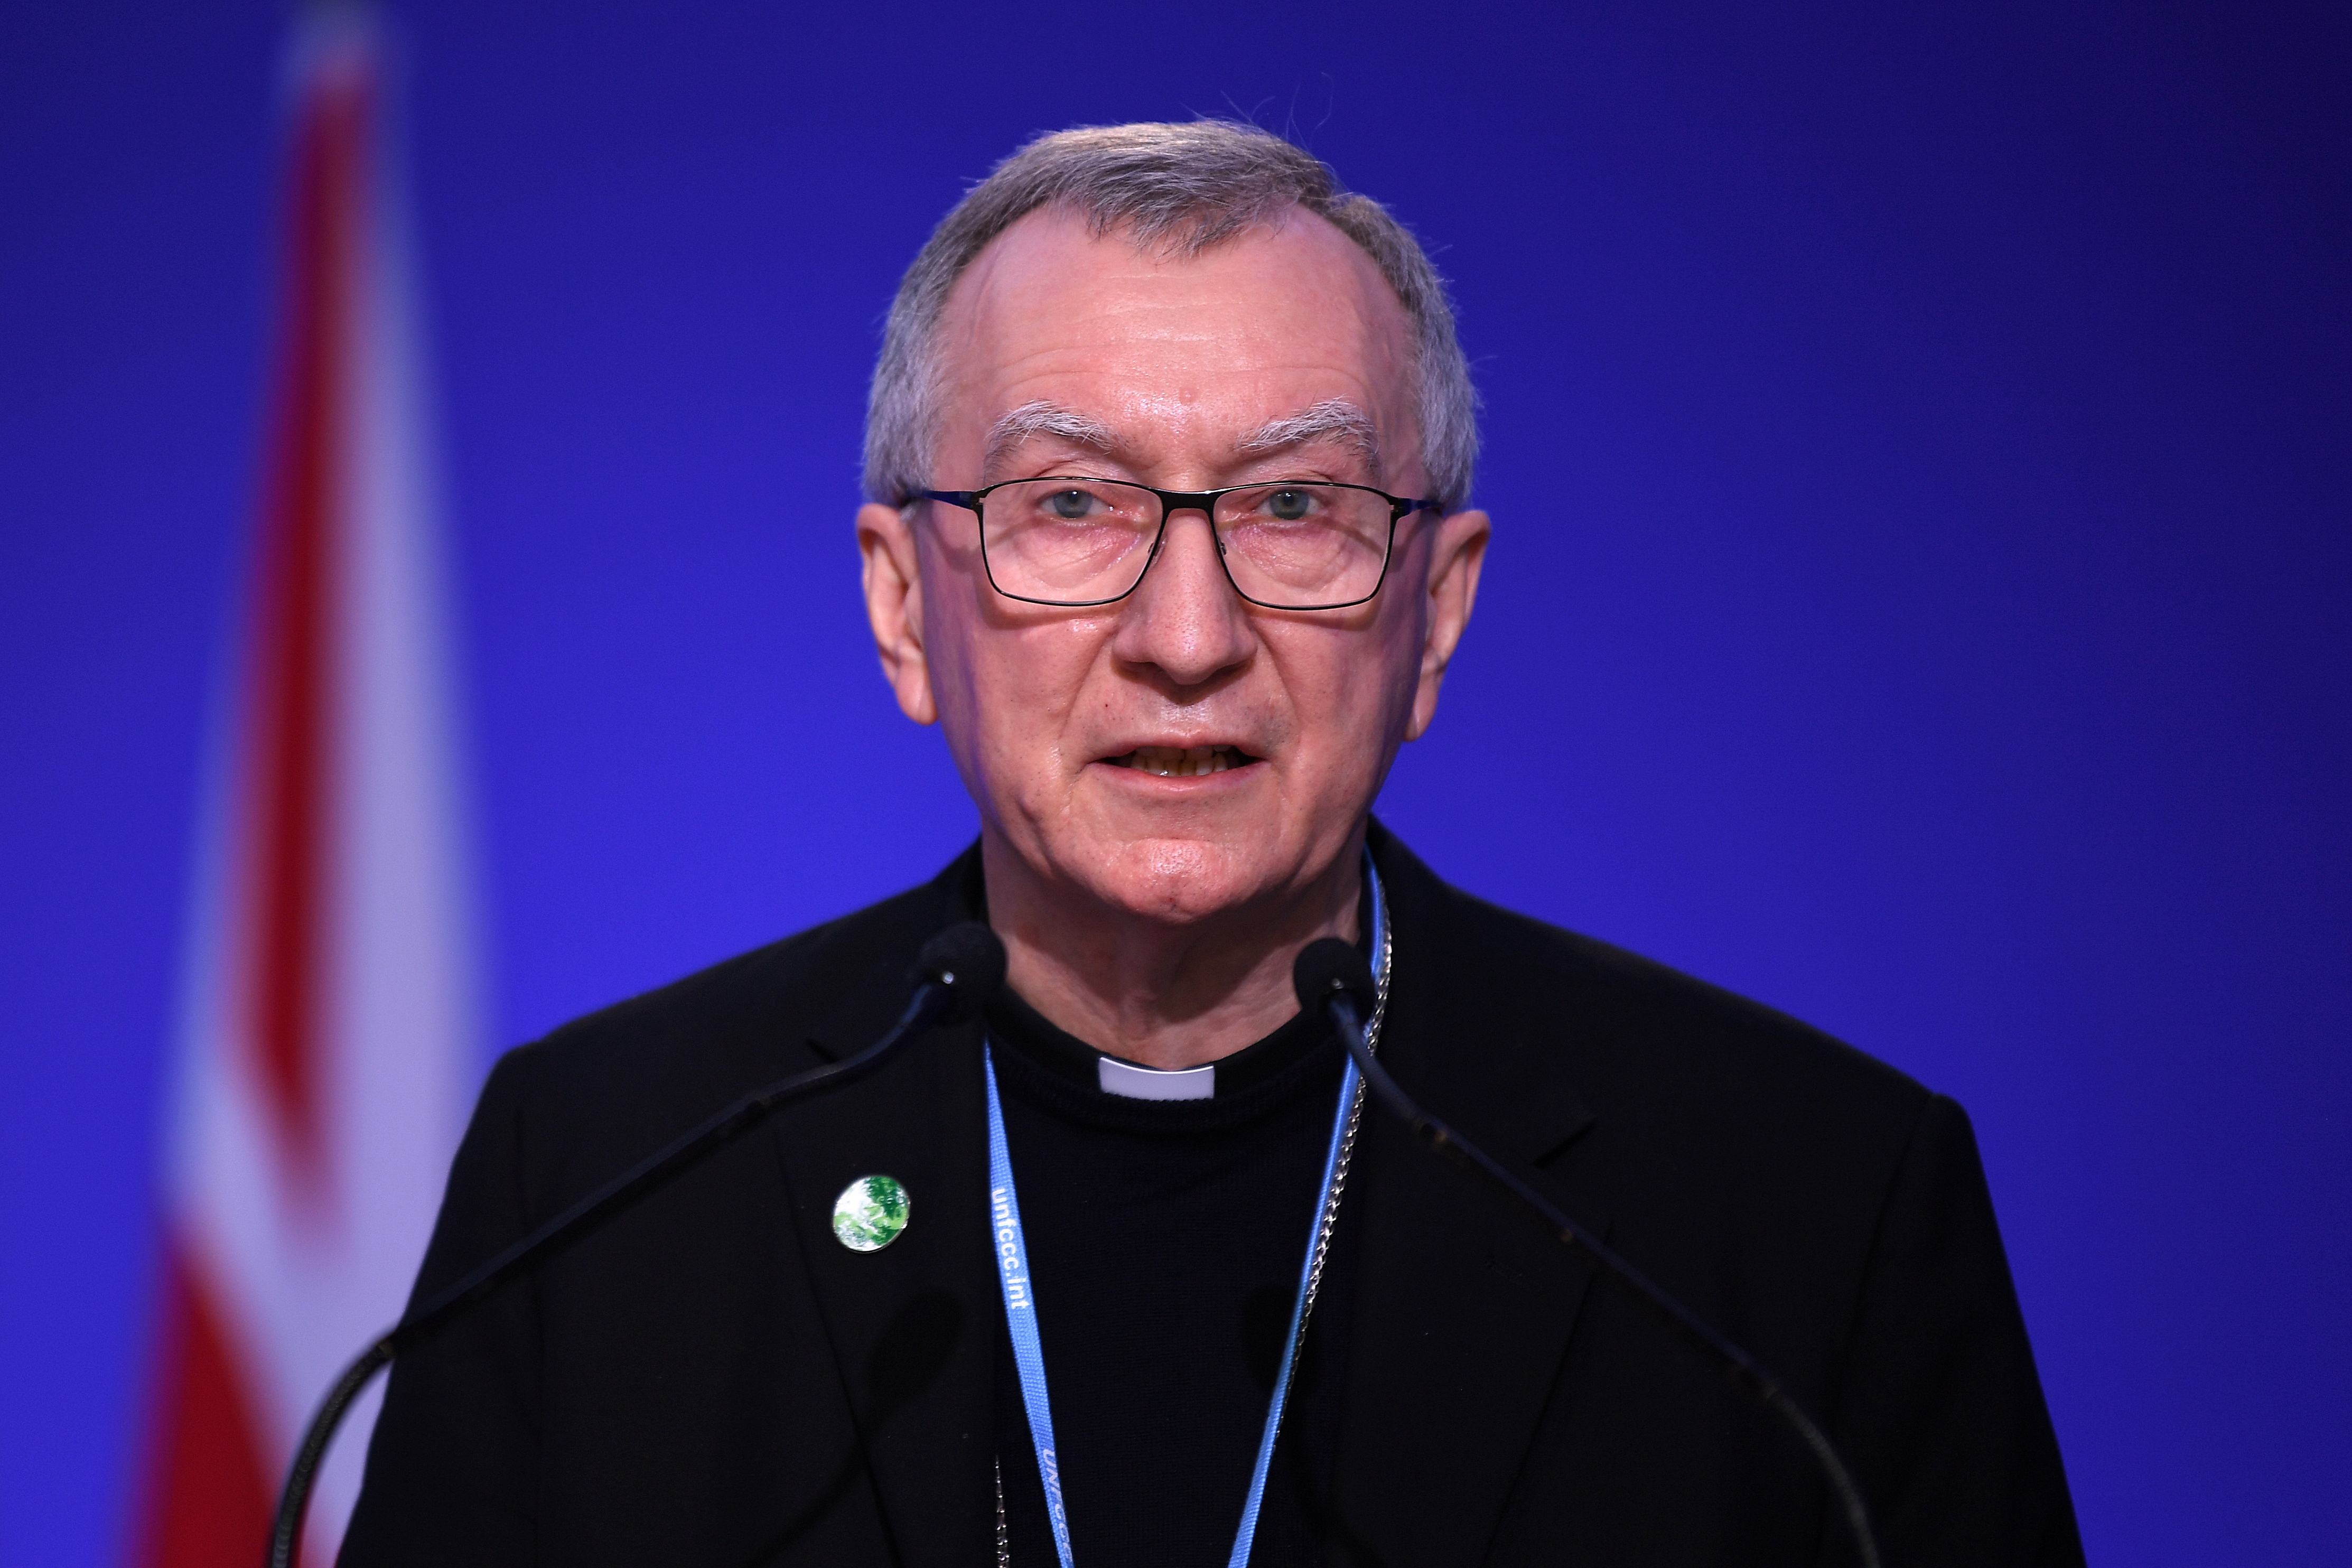 Vatican Secretary of State Cardinal Pietro Parolin in Glasgow, United Kingdom during the COP26 climate summit in November 2021.